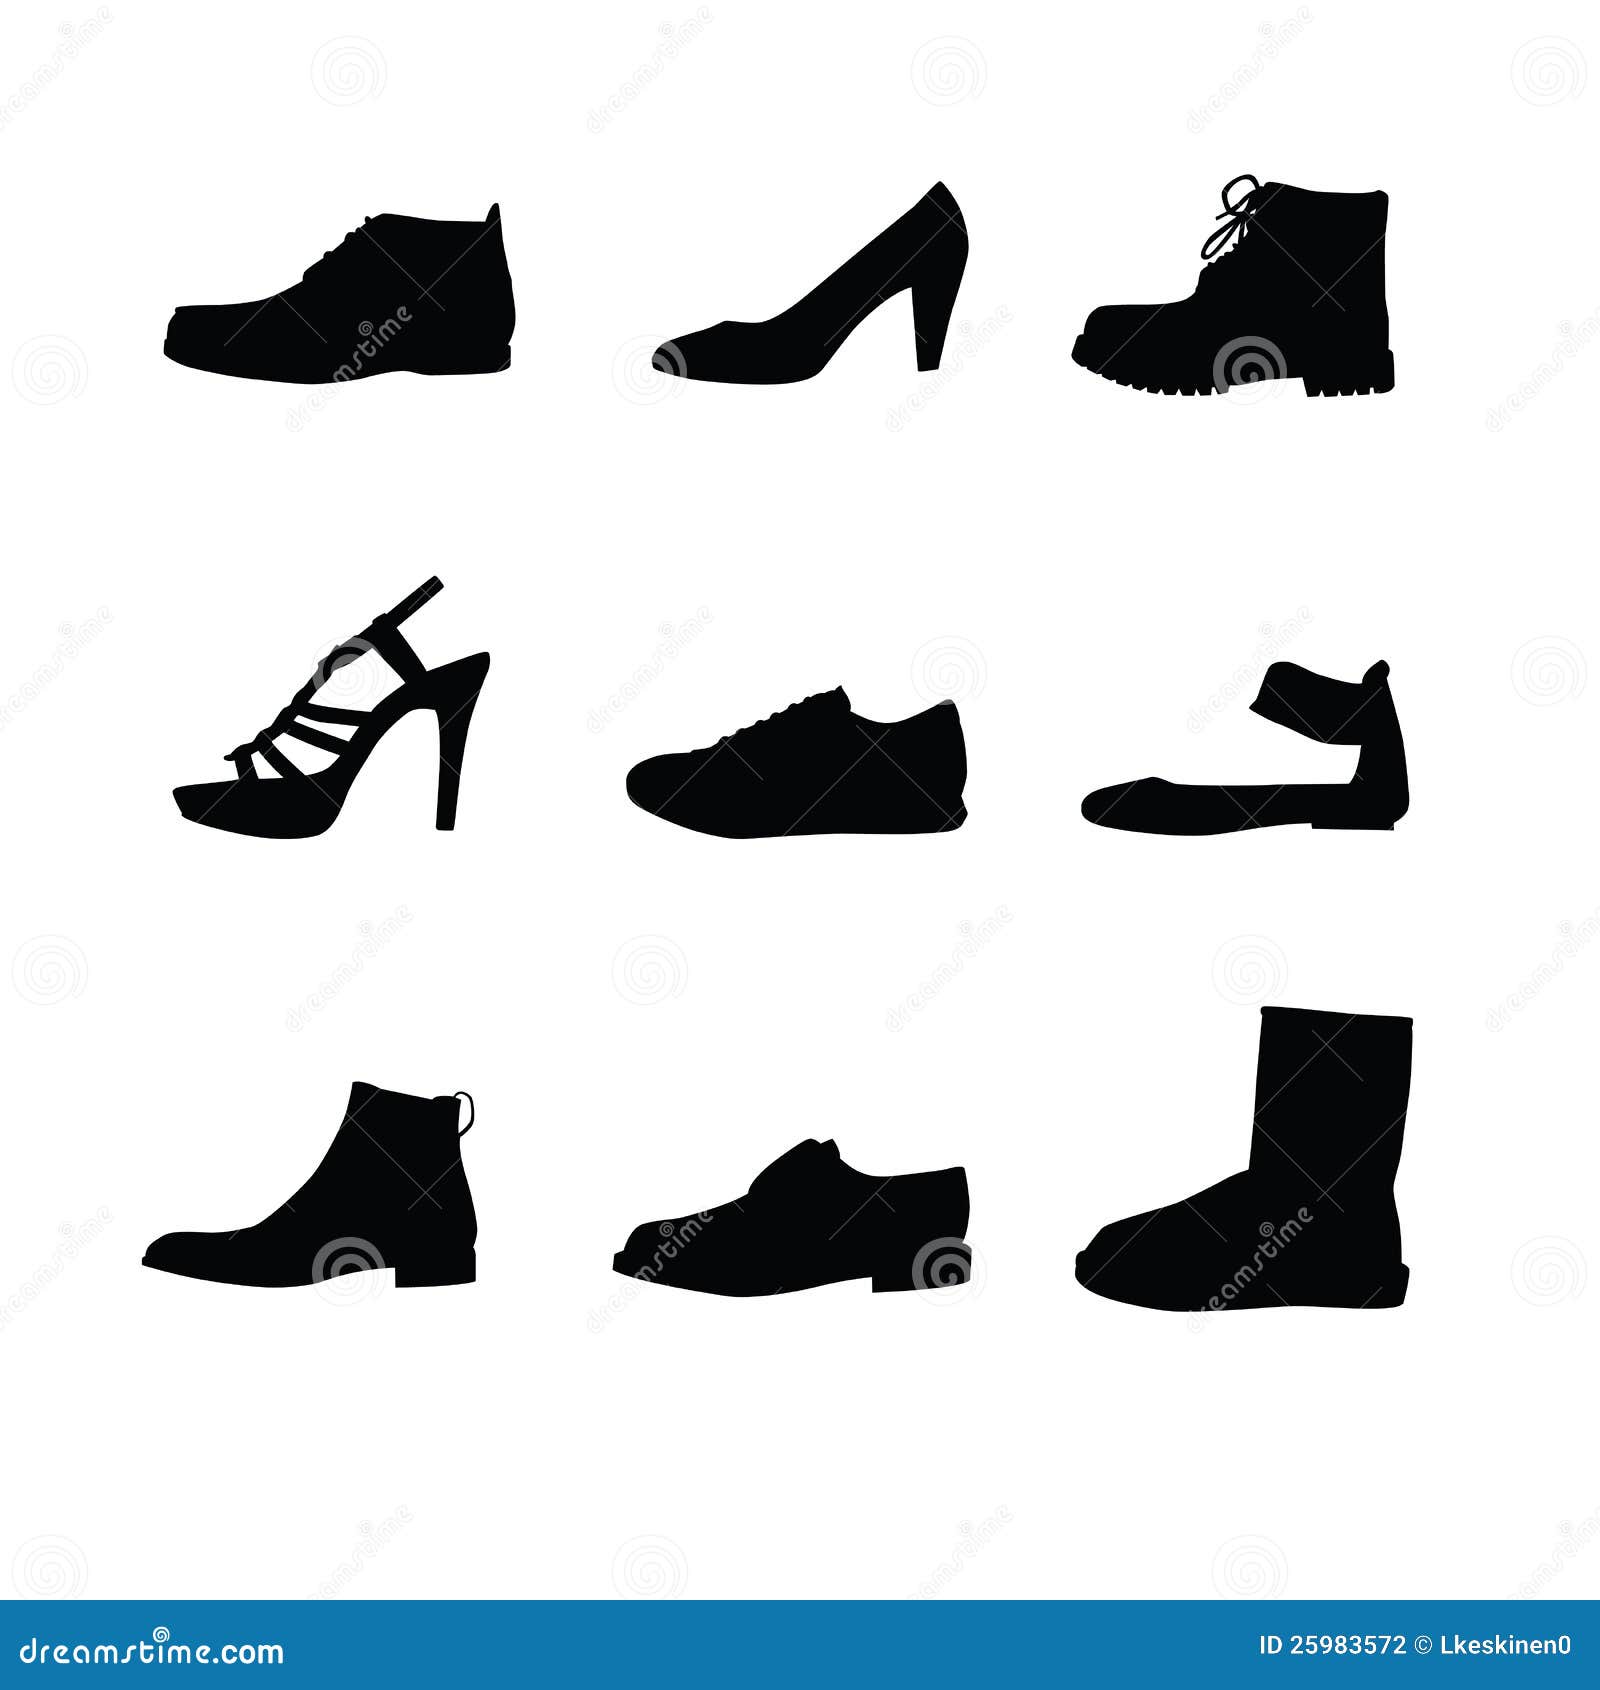 Black shoes silhouettes stock vector. Illustration of isolated - 25983572